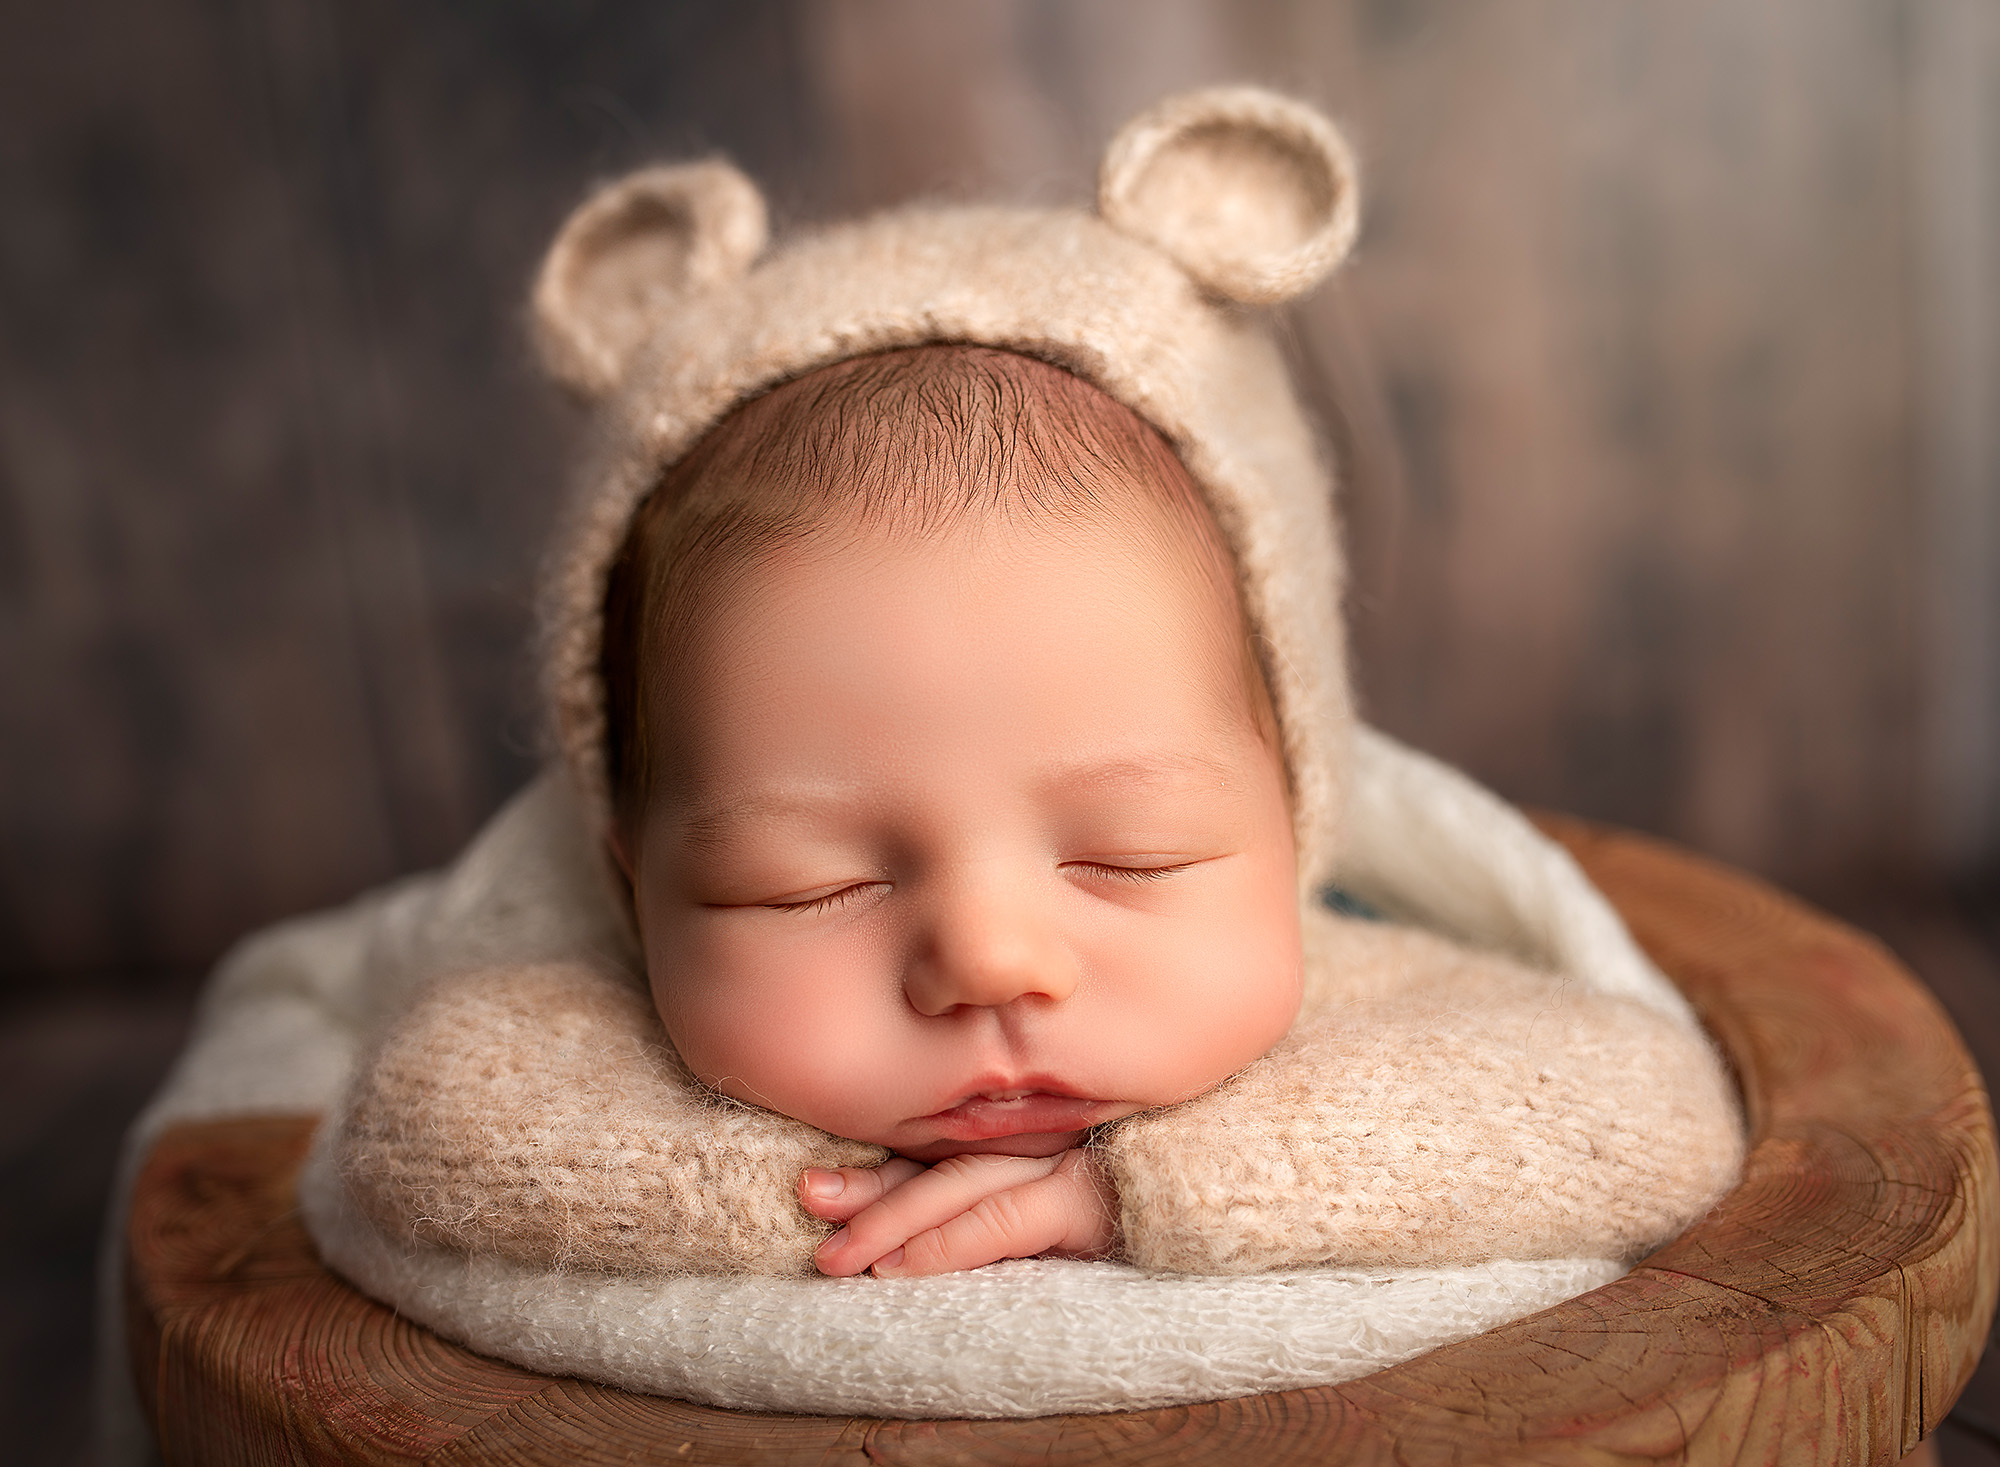 best time to take newborn photos baby dressed as teddy bear head on hands